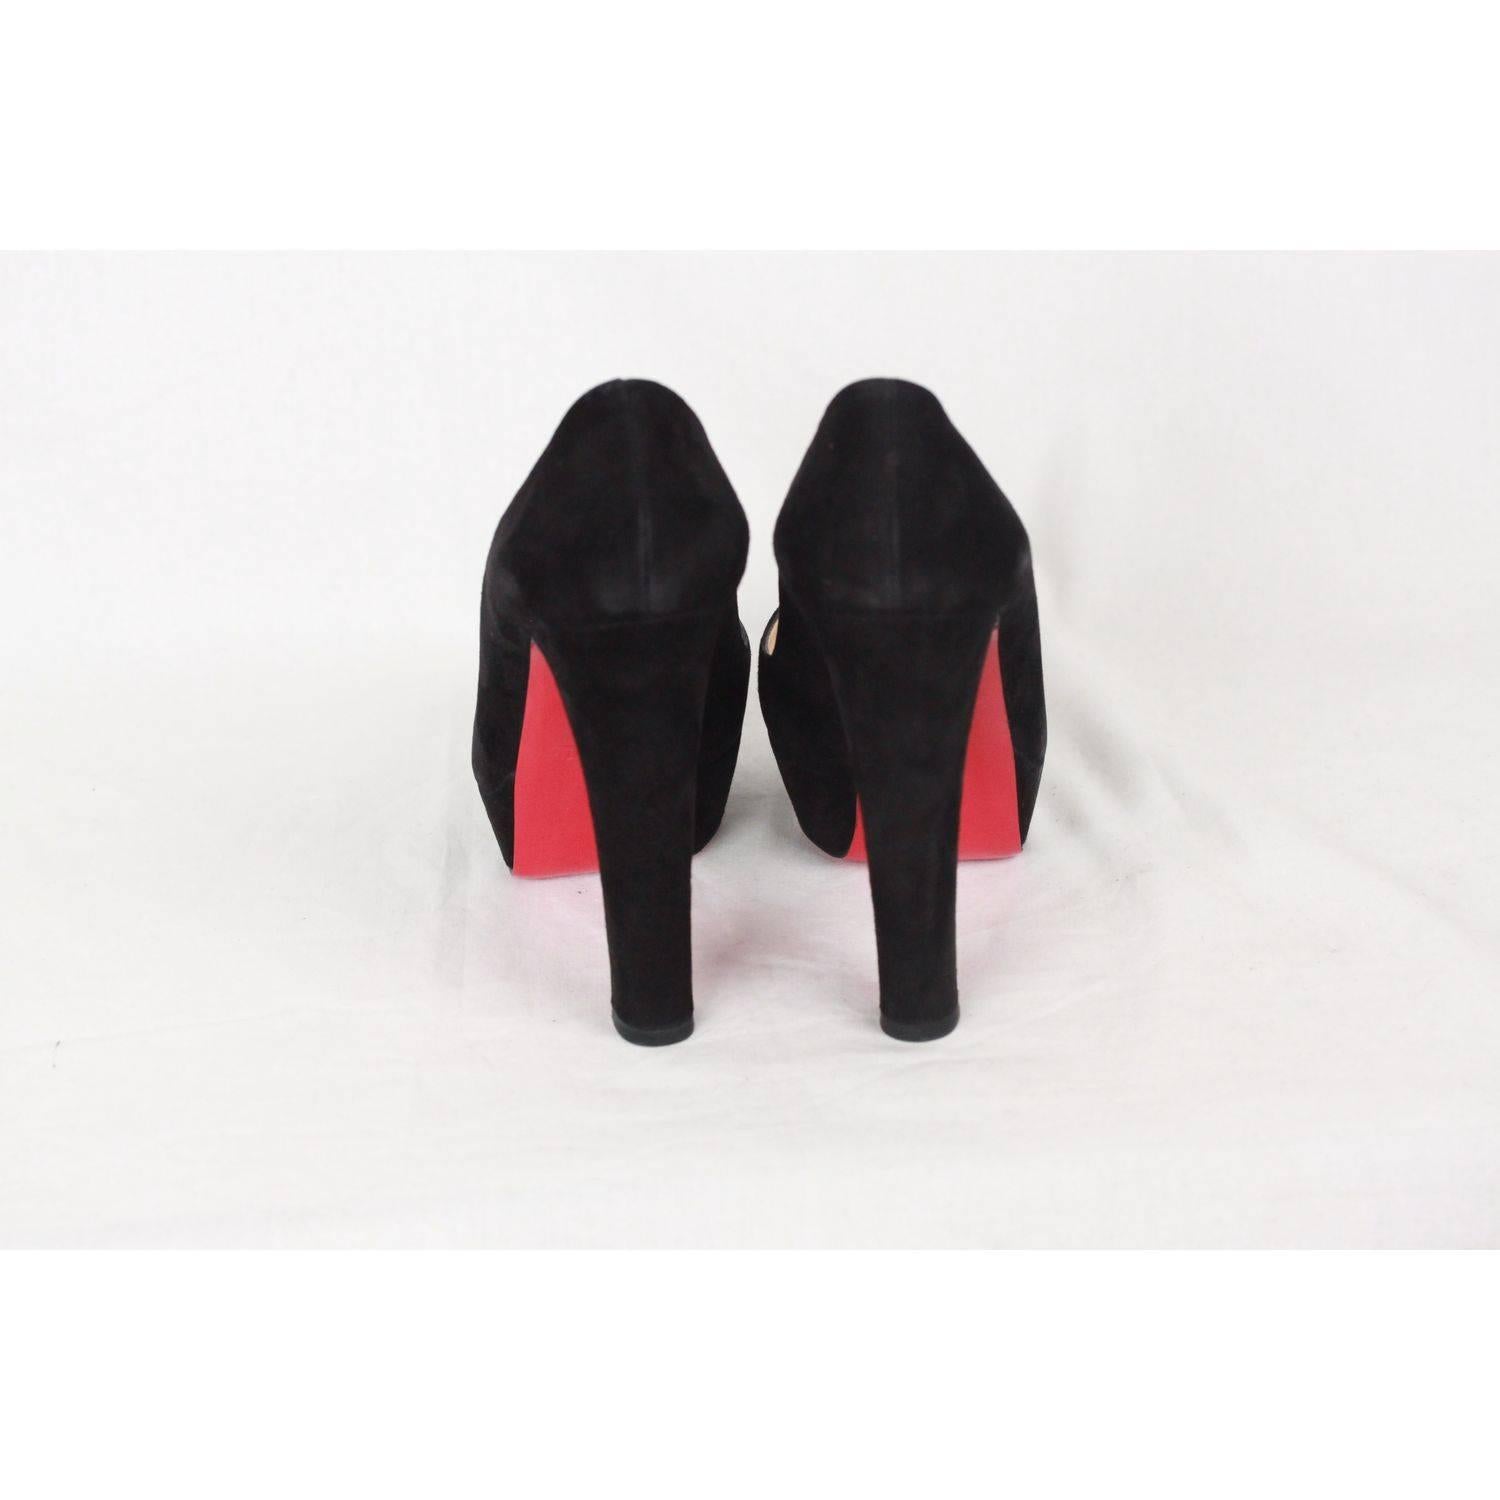 - Christian Louboutin peep toe heels
- Model: 'BAMBOU 140'
- Black suede
- 5.5 inches - 14 cm covered block heels
- Platform: 1 inch - 2,5 cm 
- Signature red leather outsole
- Made in Italy
- Size: 37 1/2 (The size shown for this item is the size